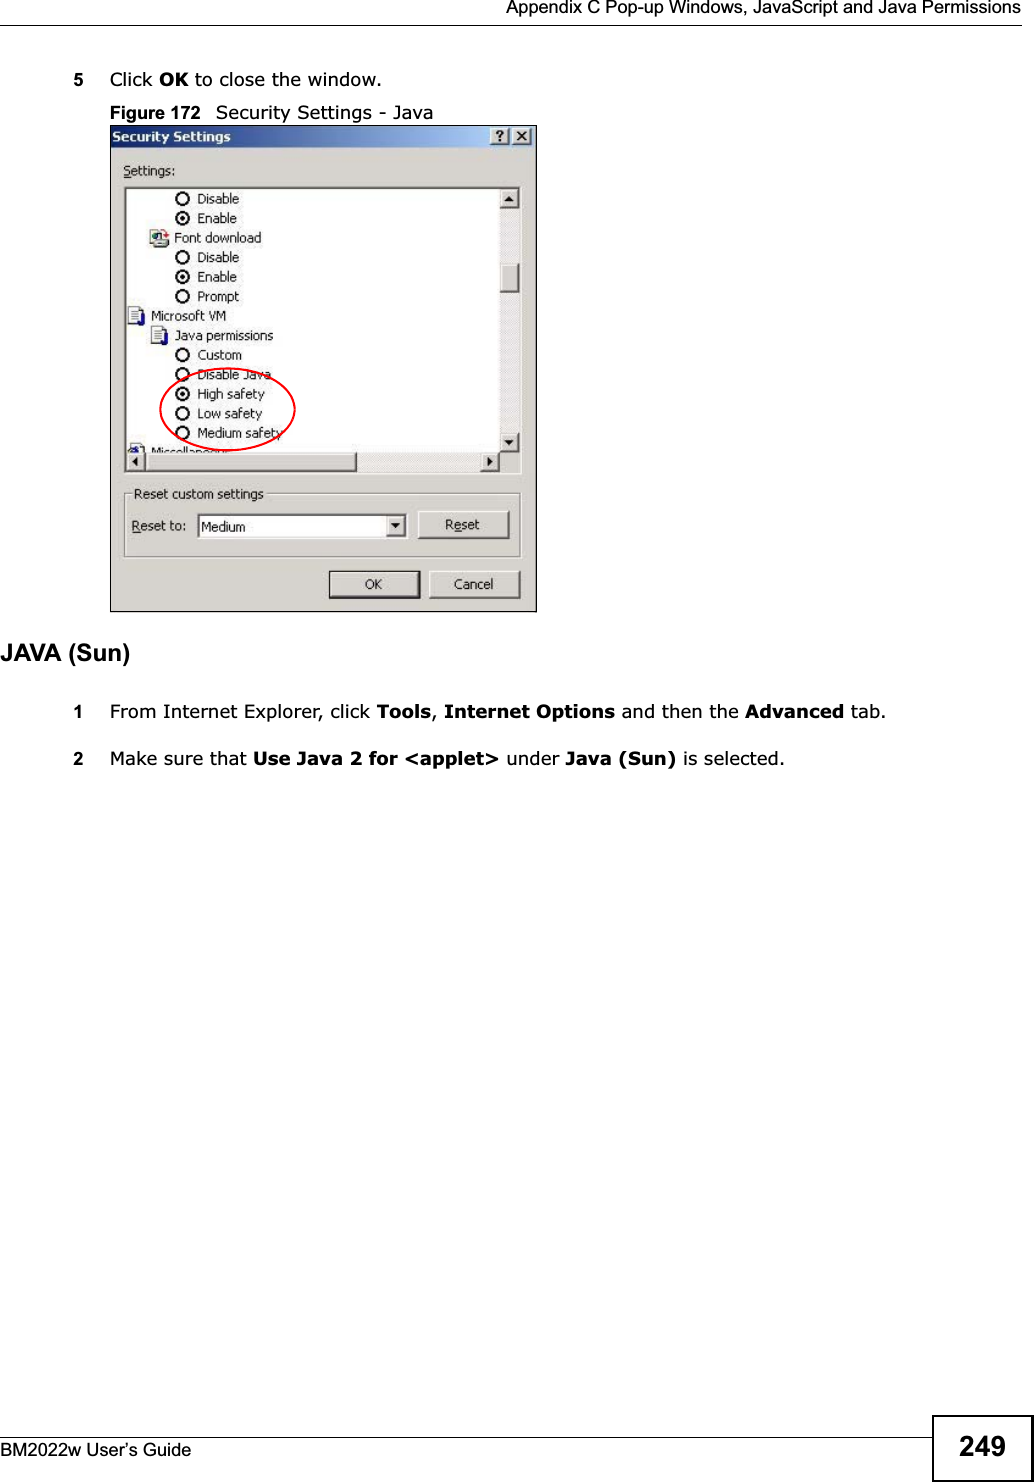  Appendix C Pop-up Windows, JavaScript and Java PermissionsBM2022w User’s Guide 2495Click OK to close the window.Figure 172   Security Settings - Java JAVA (Sun)1From Internet Explorer, click Tools,Internet Options and then the Advanced tab. 2Make sure that Use Java 2 for &lt;applet&gt; under Java (Sun) is selected.